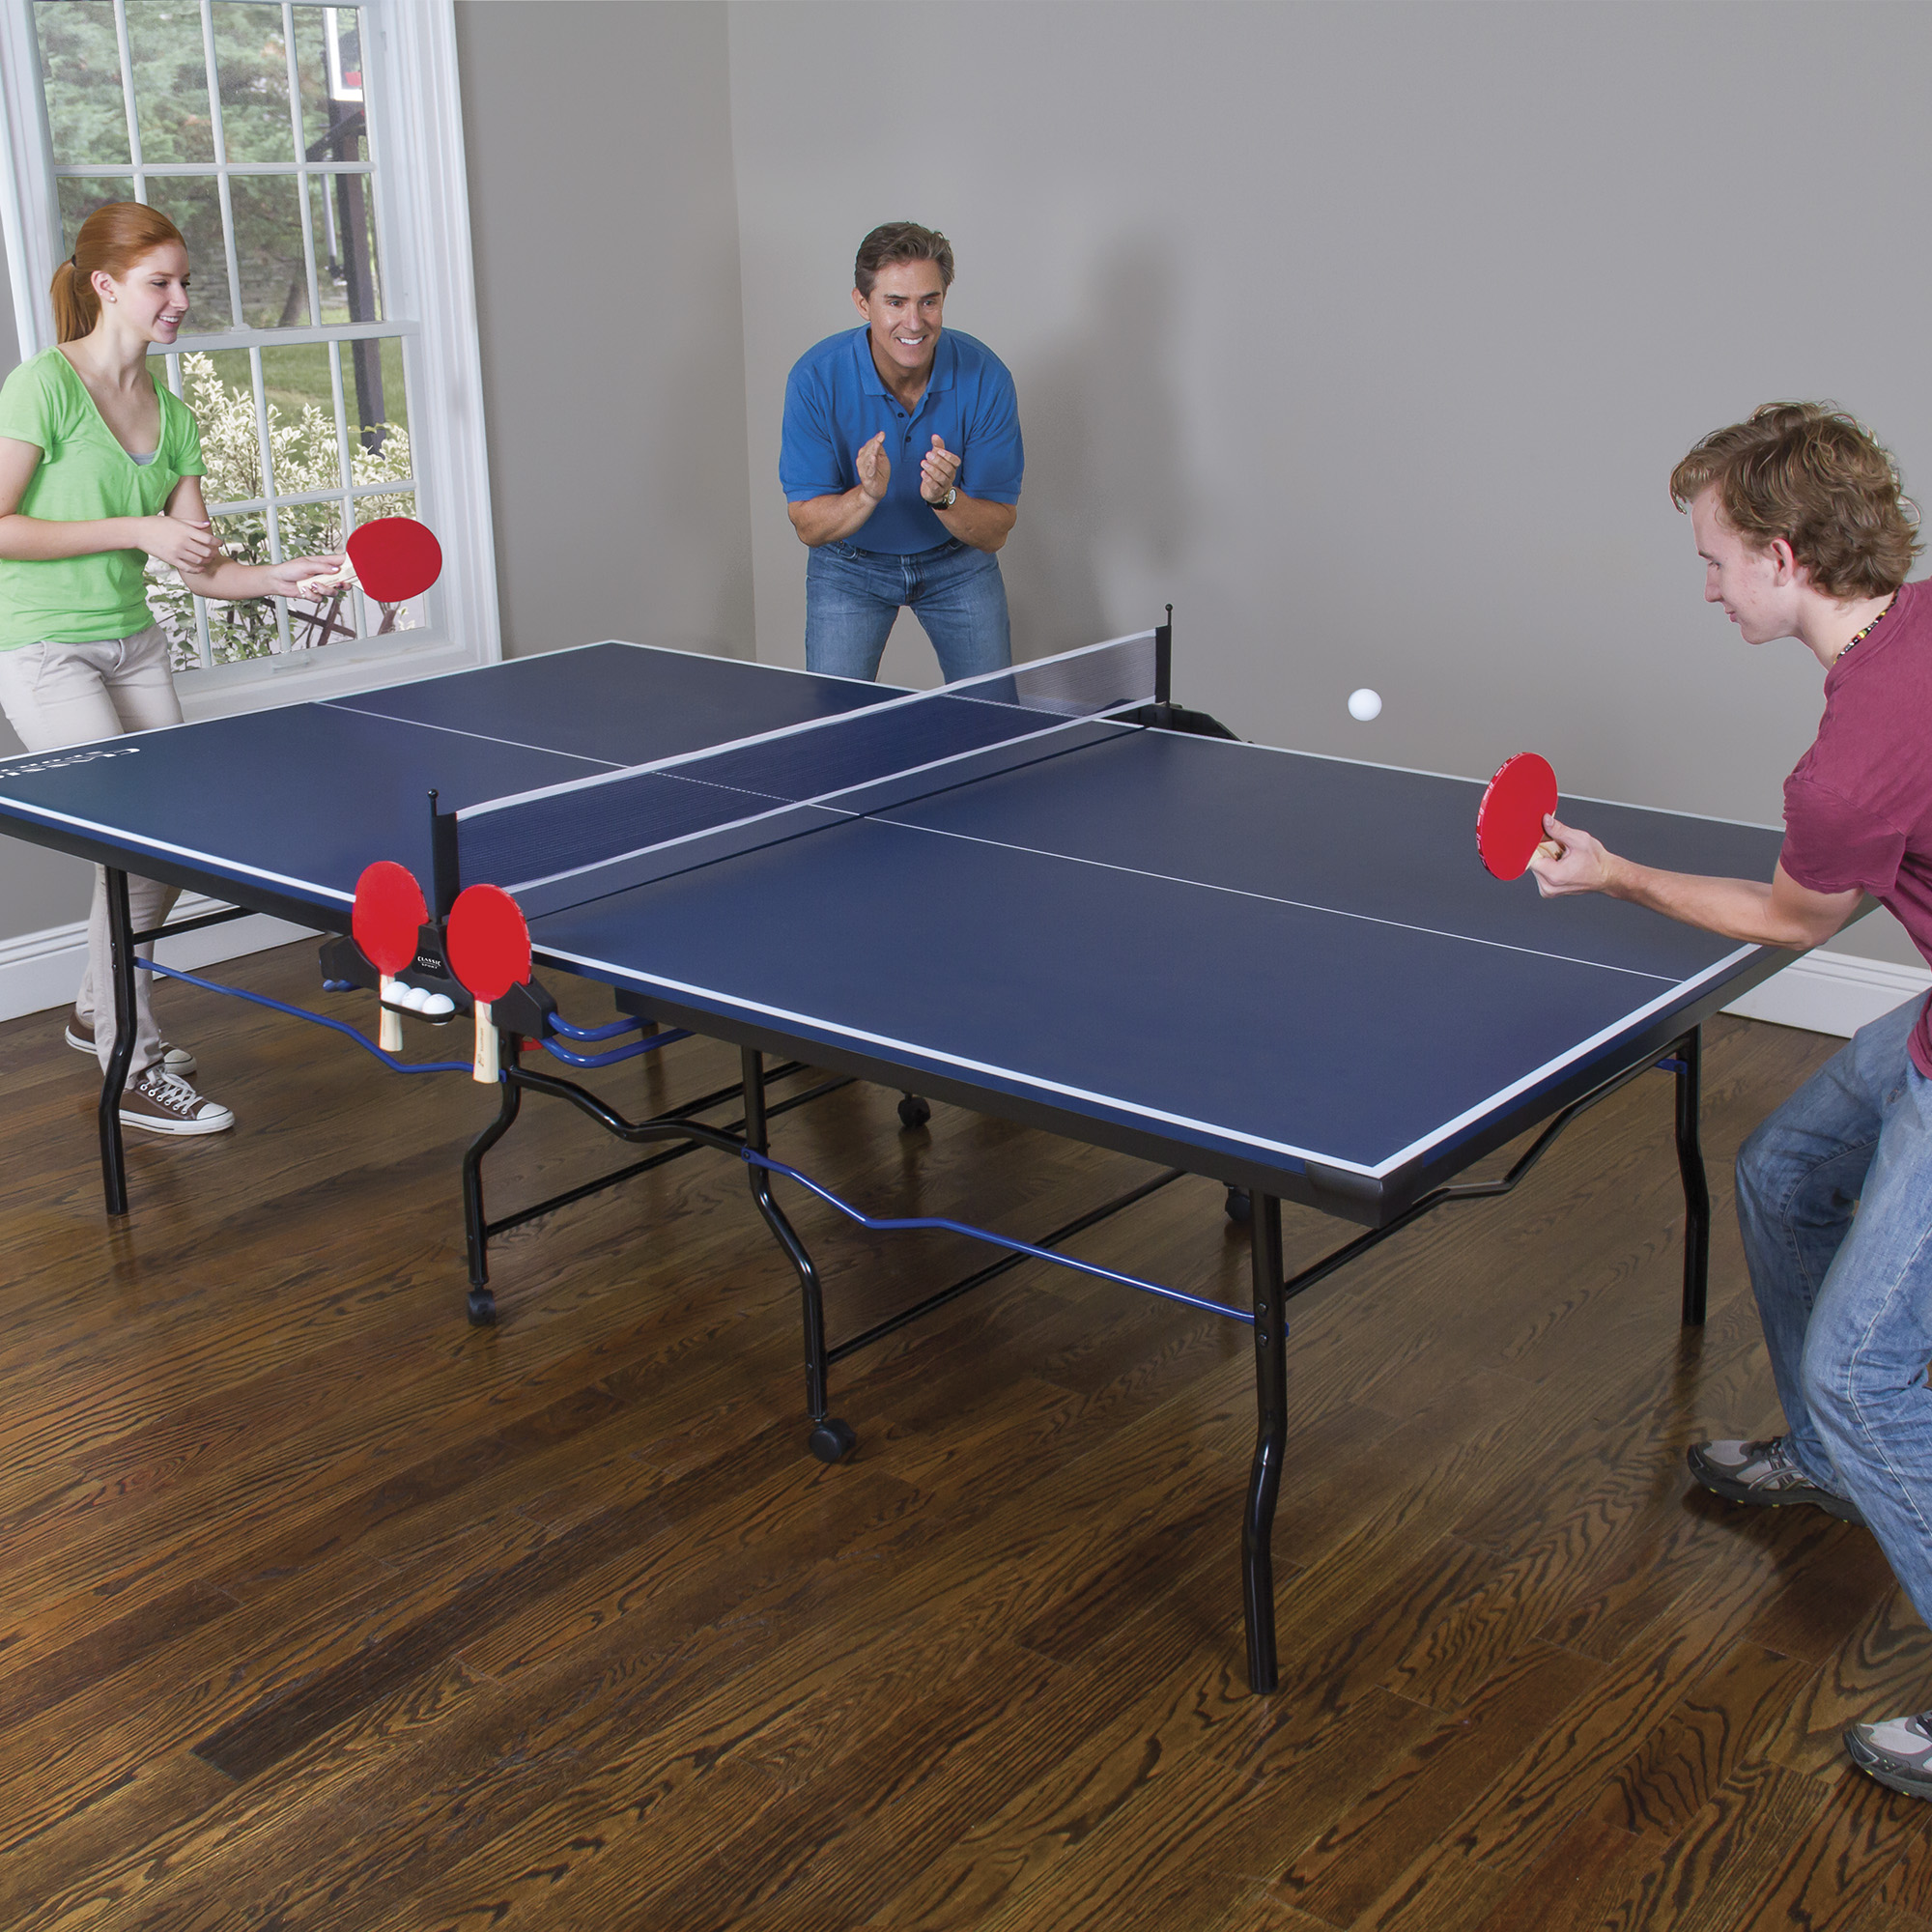 EastPoint Sports Classic Sport 15mm Table Tennis Table, Tournament Size 9 ft. x 5 ft. for Indoor Game Room - image 9 of 10